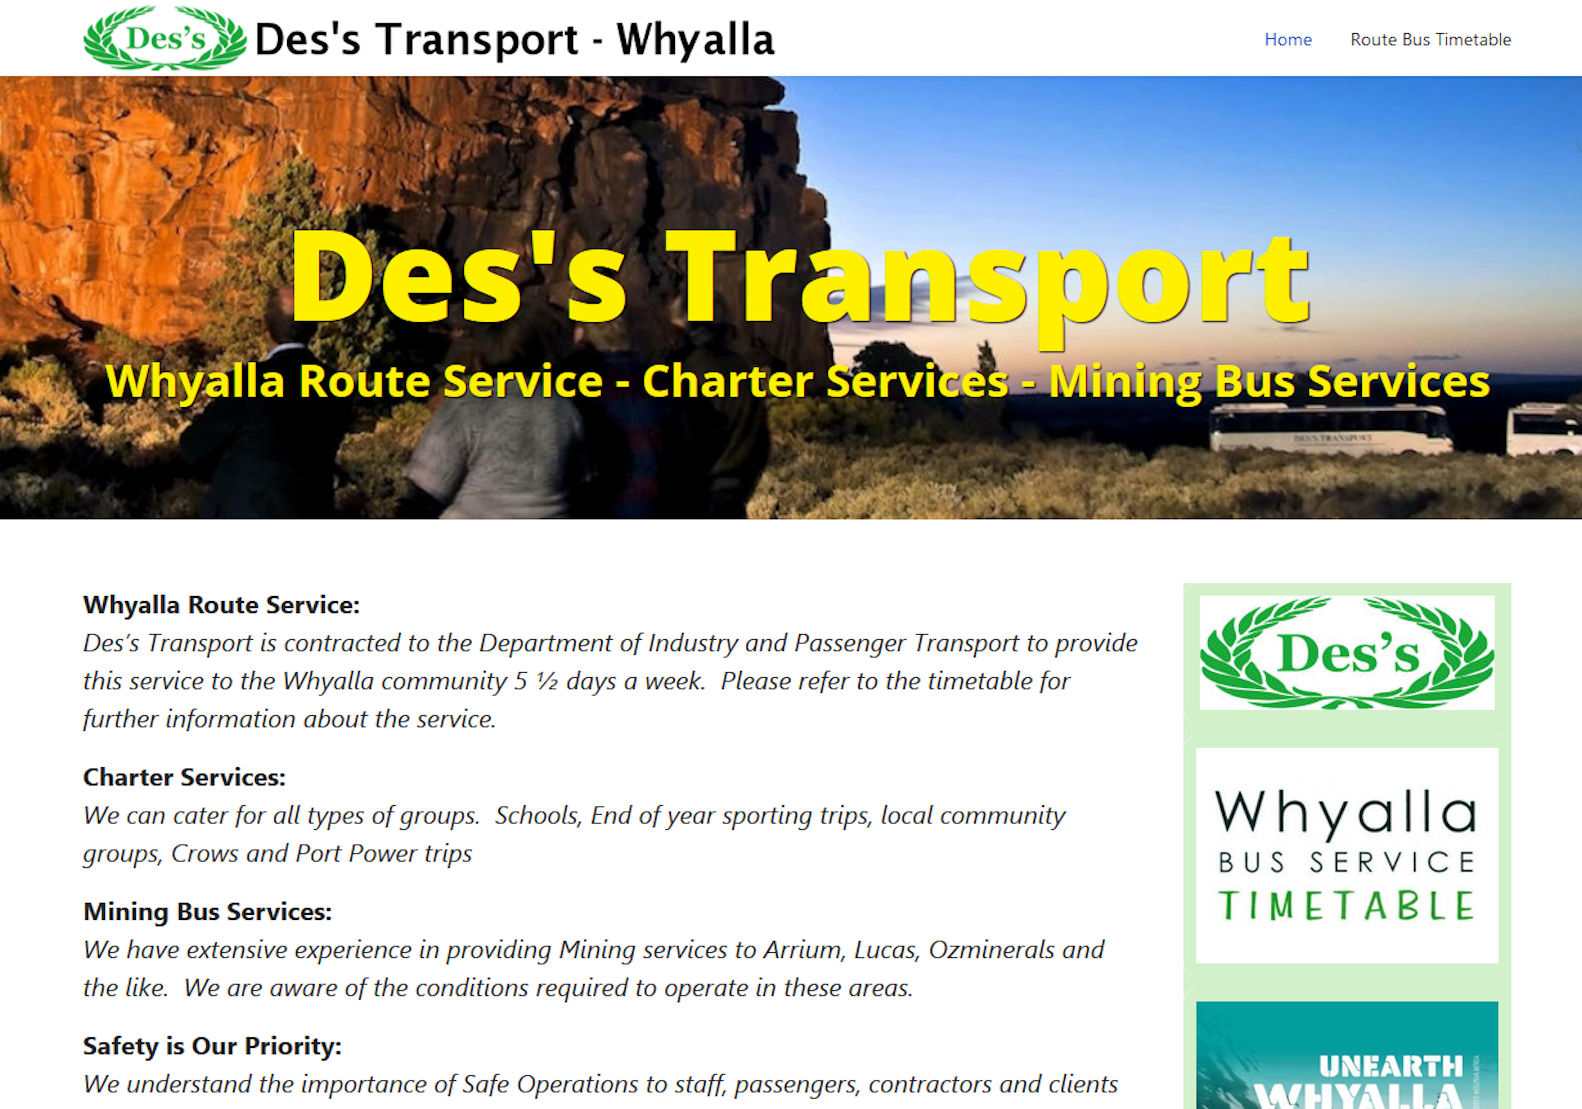 Whyalla Bus Service